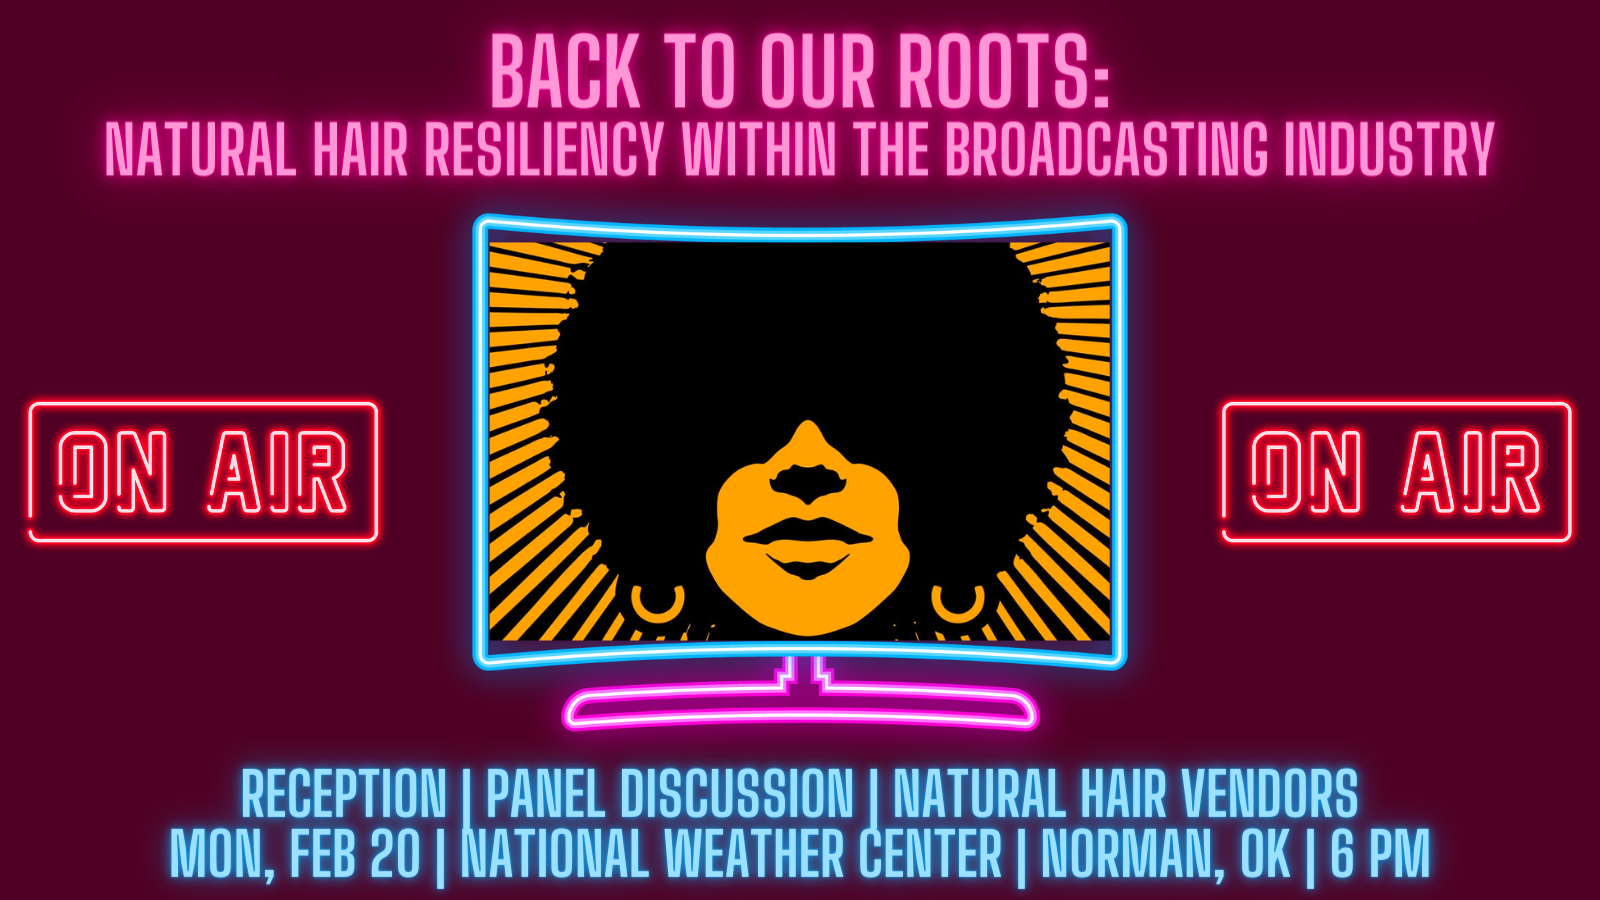 Back to our Roots: Natual Hair Resiliency within the Broadcasting Industry. ON AIR ON AIR. Reception | Panel Discussion | Natural Hair Vendors | Monday February 20, 2023 | National Weather Center, Norman, OK starting at 6pm